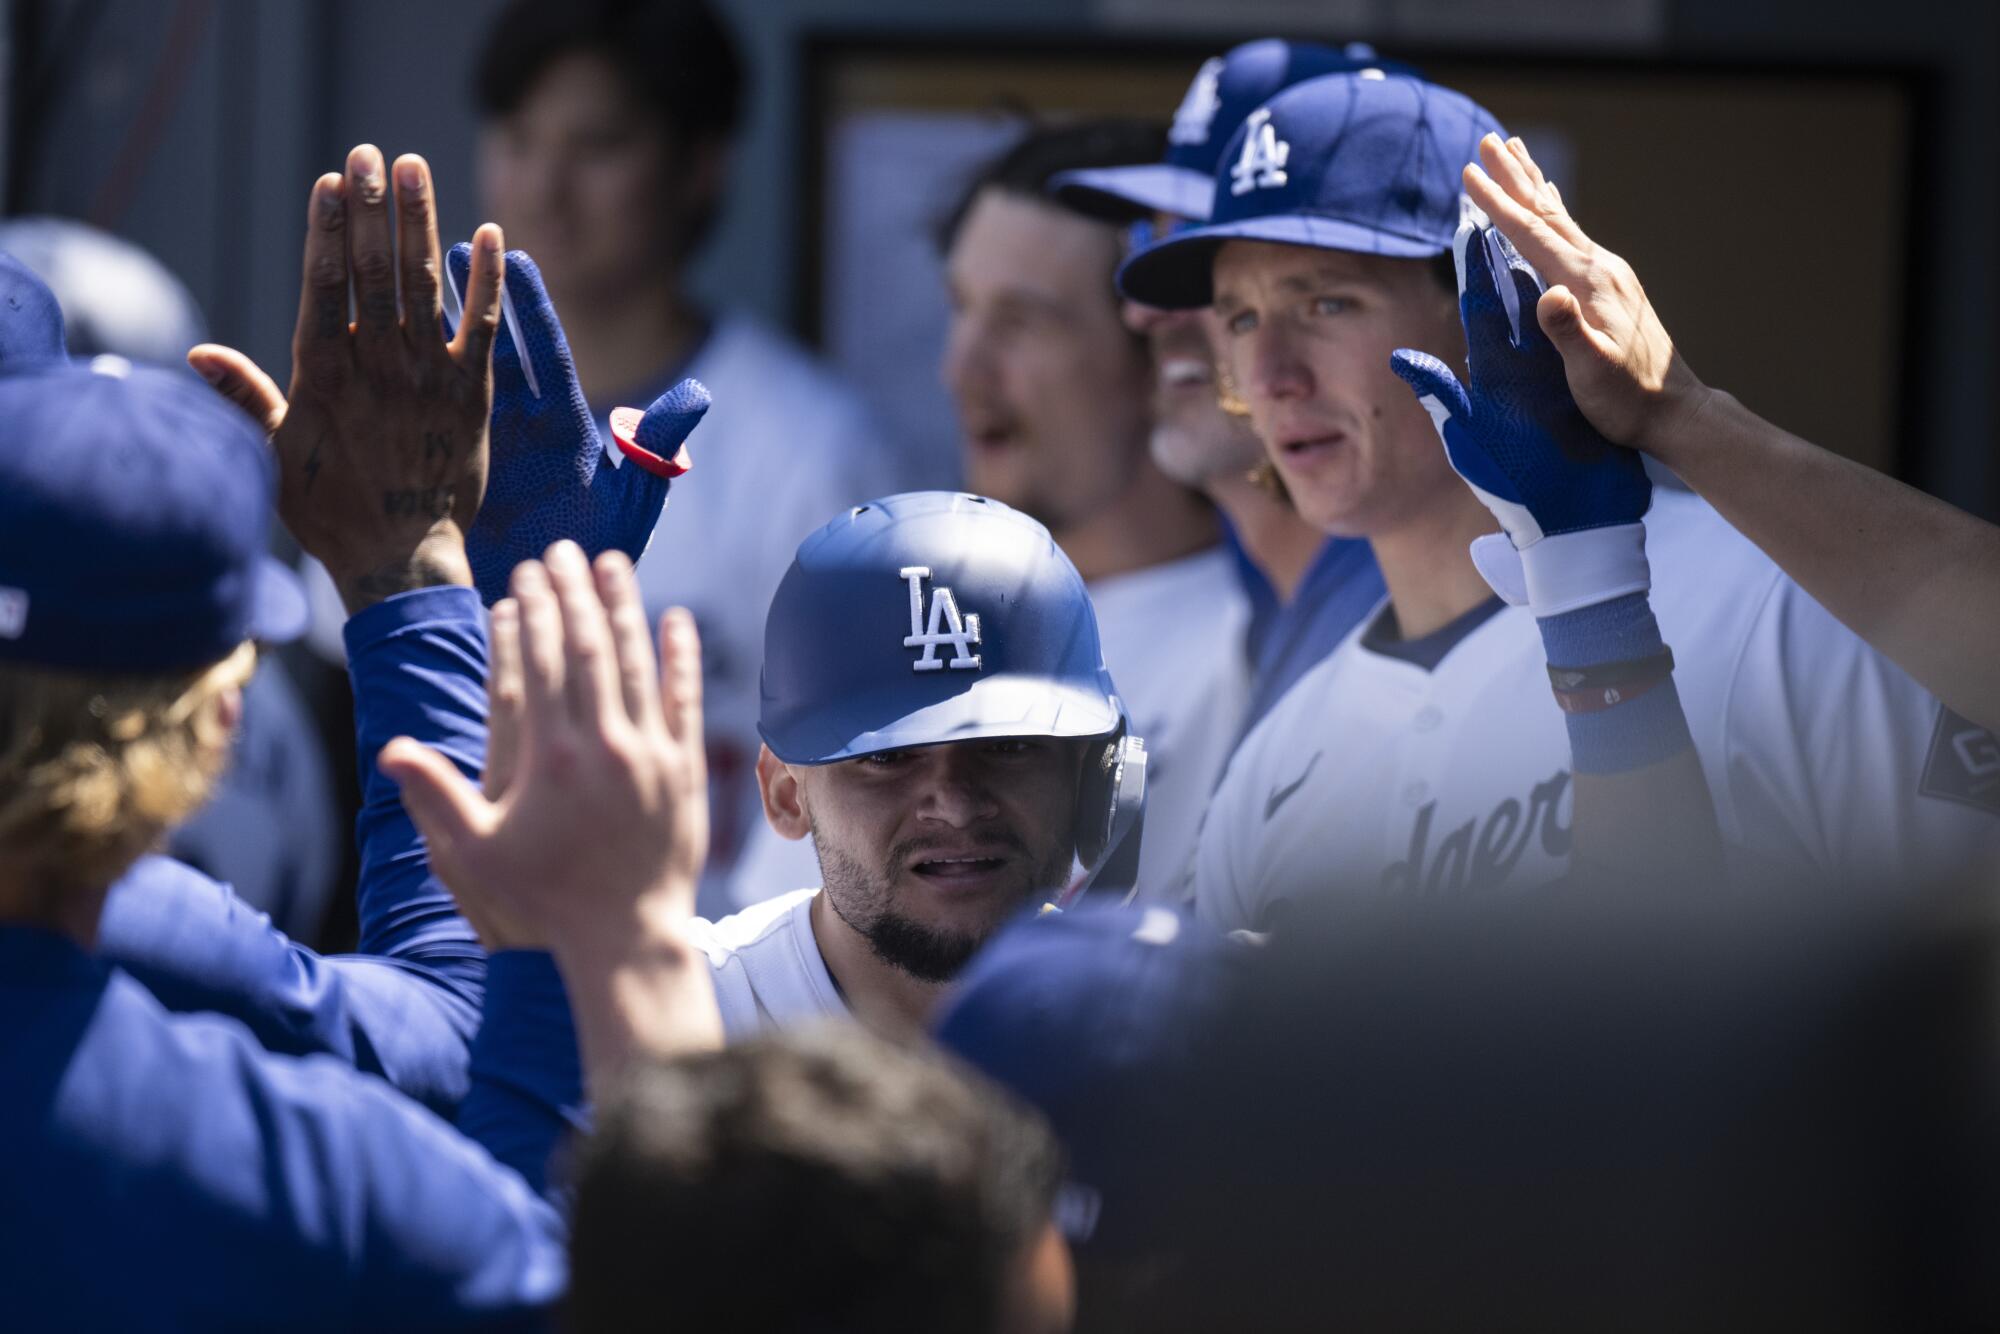 Dodgers outfielder Andy Pages is congratulated by teammates in the dugout after hitting a 3-run home run against the Mets.